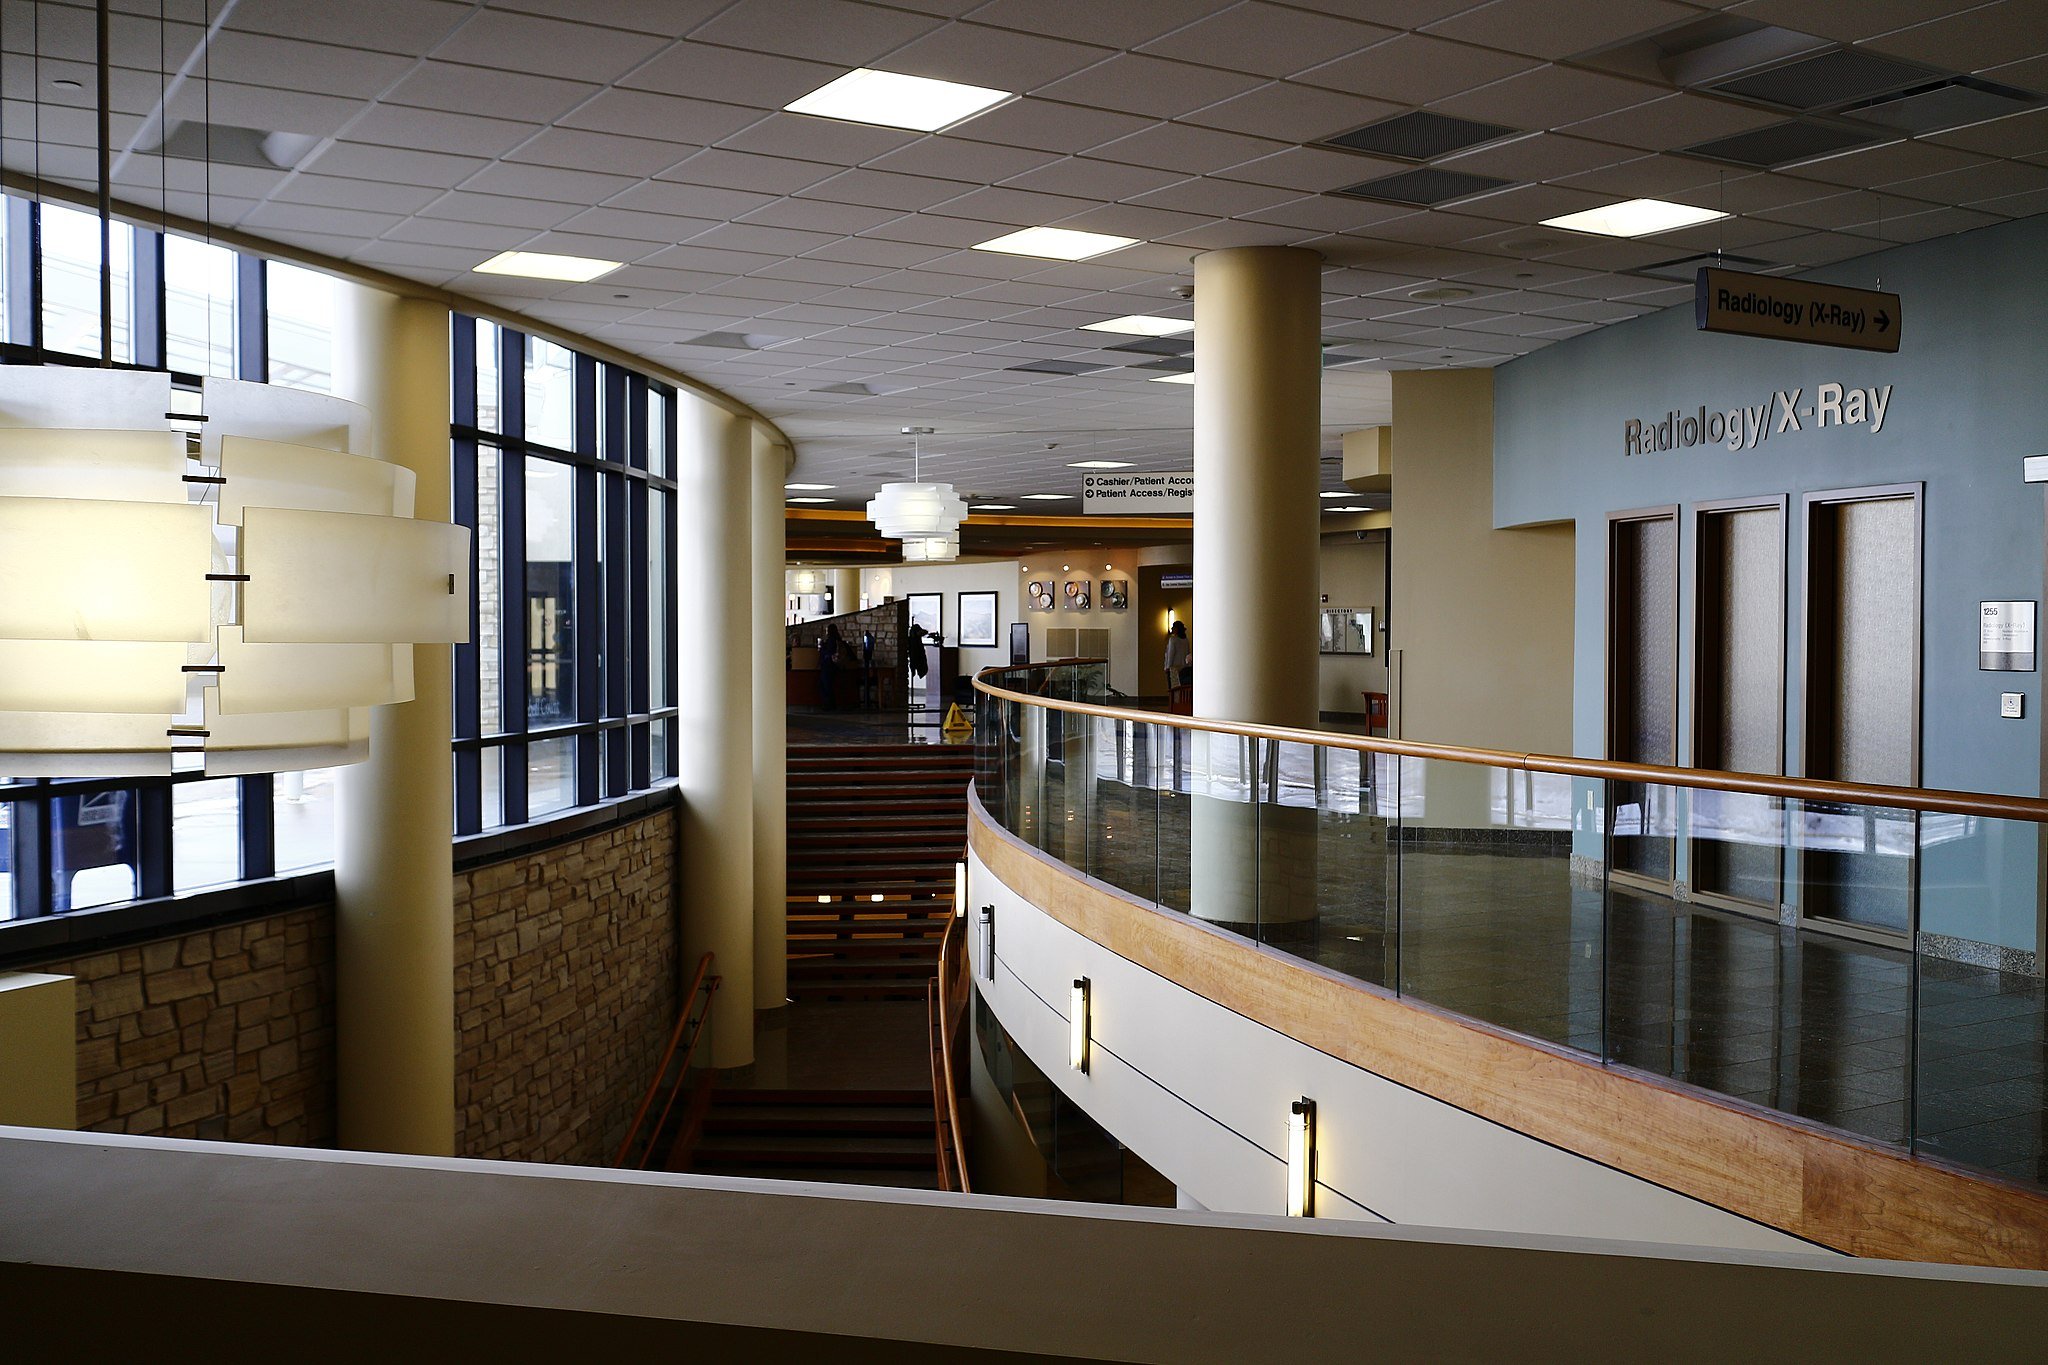 Campbell_County_Memorial_Hospital_lobby_in_Gillette,_Wyoming.jpg